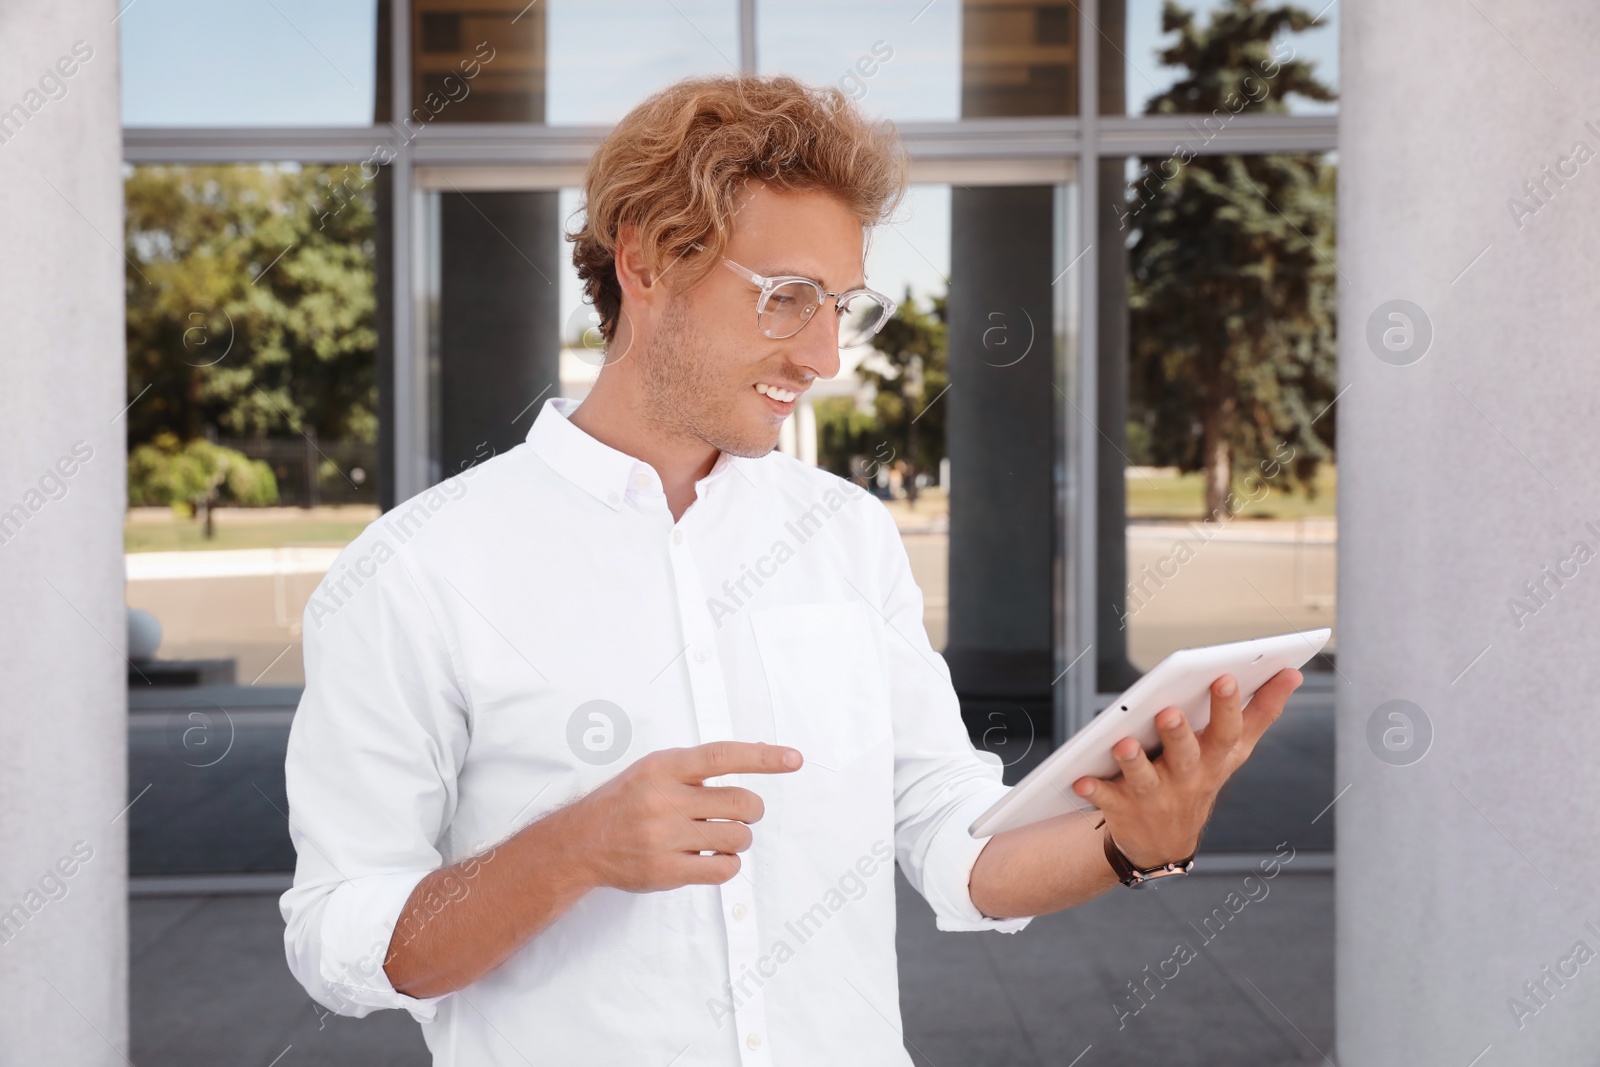 Photo of Male real estate agent with tablet outdoors